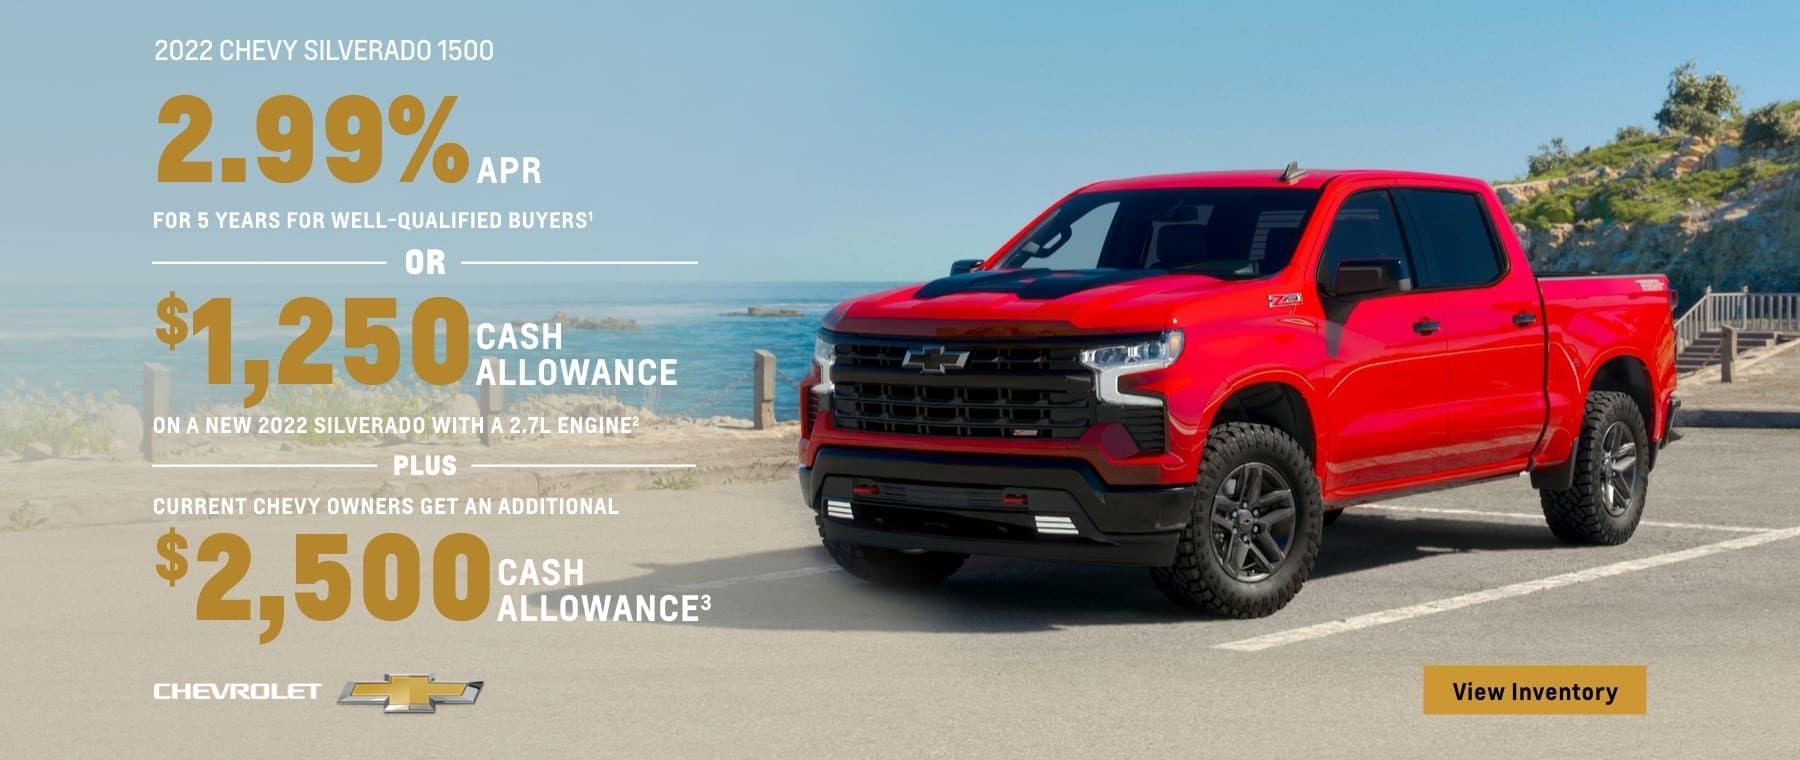 2022 Chevy Silverado 1500. 2.99% APR for 5 years for well-qualified buyers. Or, $1,250 cash allowance on a new 2022 Silverado with a 2.7L engine. Plus, current Chevy owners get an additional $2,500 cash allowance.